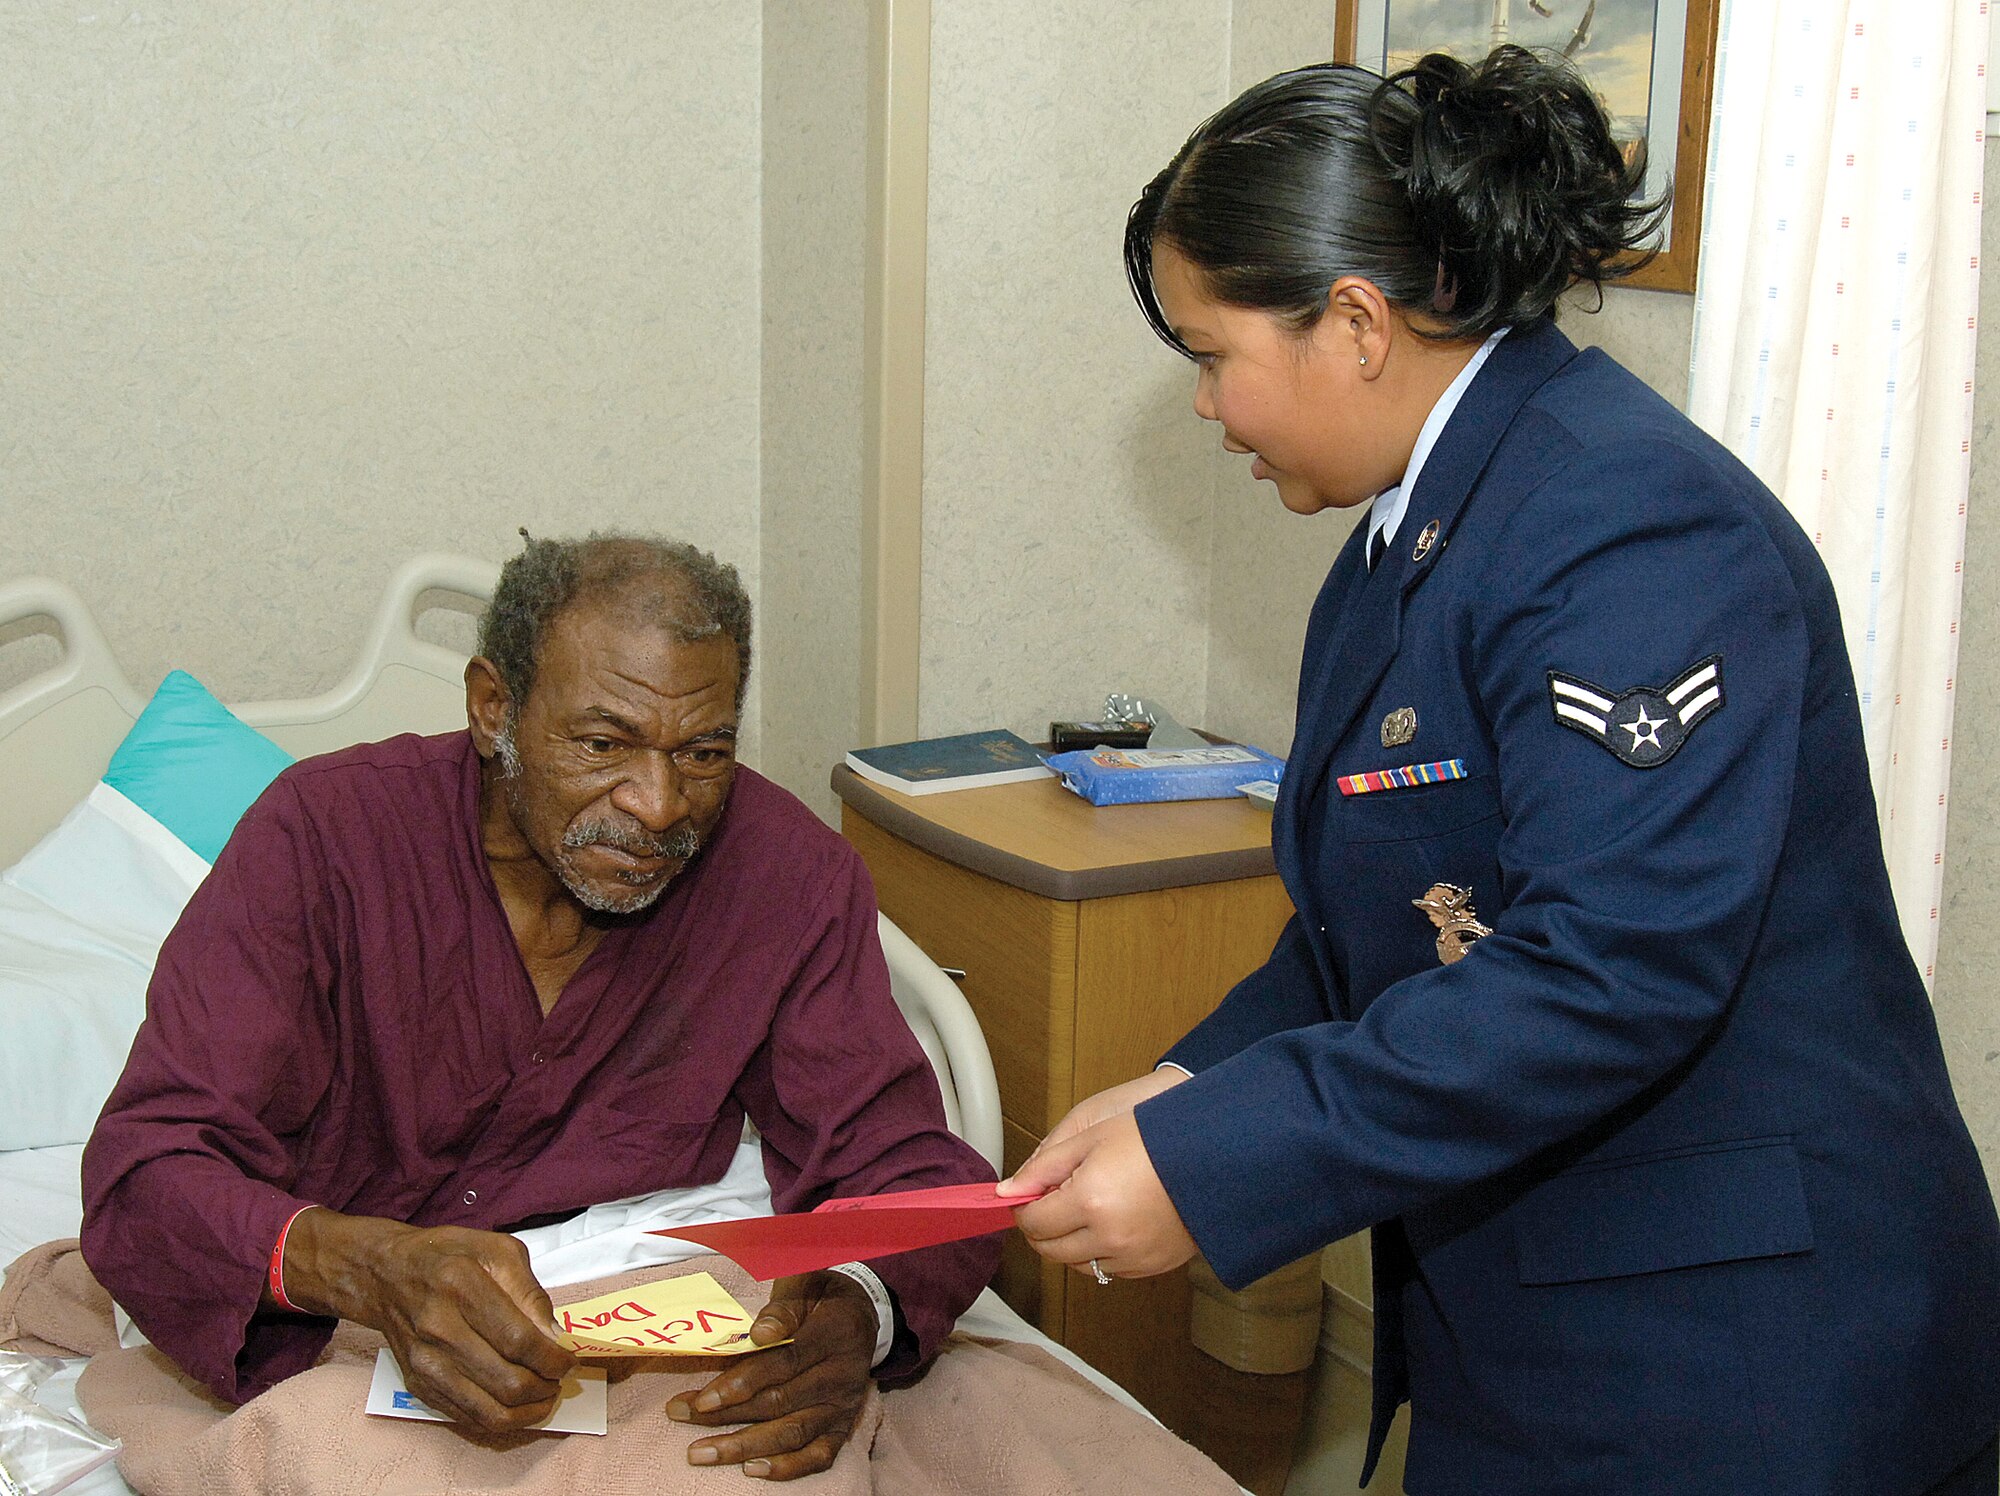 Airman 1st Class Edrianne Flores-Tullis, 72nd Security Forces Squadron, greets Army veteran George Whitney with schoolchildren-made Veterans Day cards during a visit to the Oklahoma City Veterans Affairs Medical Center Nov. 10. Airman 1st Class Edrianne Flores-Tullis, 72nd Security Forces Squadron, greets Army veteran George Whitney with schoolchildren-made Veterans Day cards during a visit to the Oklahoma City Veterans Affairs Medical Center Nov. 10.  (Air Force photo/Margo Wright)